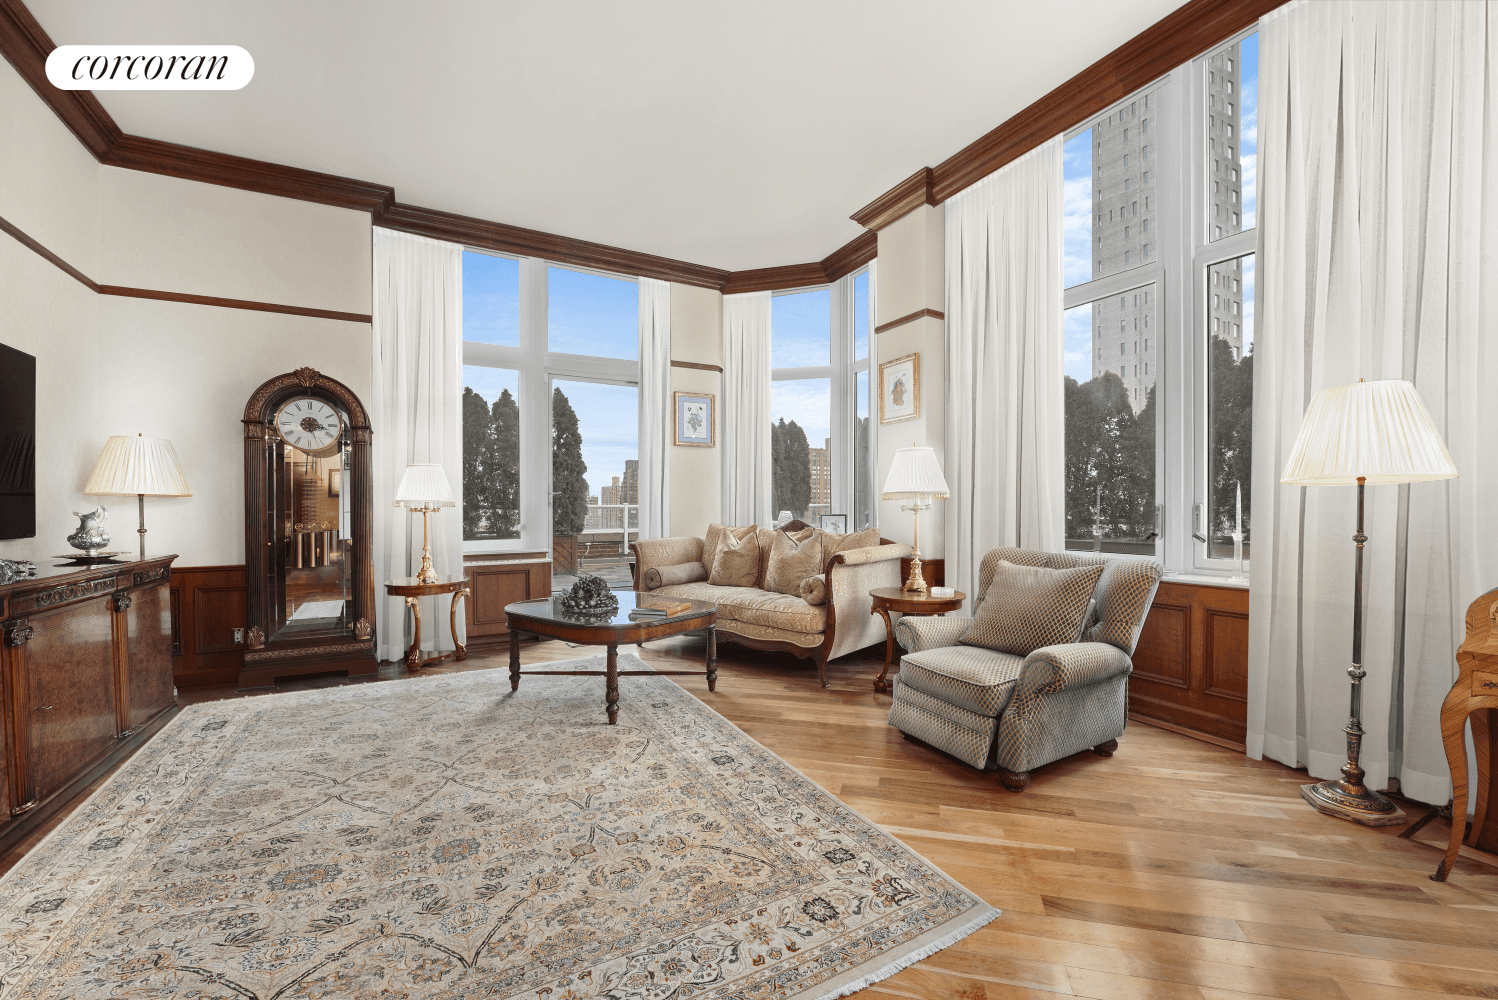 Introducing a truly unparalleled gem within the Upper East Side a meticulously designed home that stands as a testament to luxurious living.